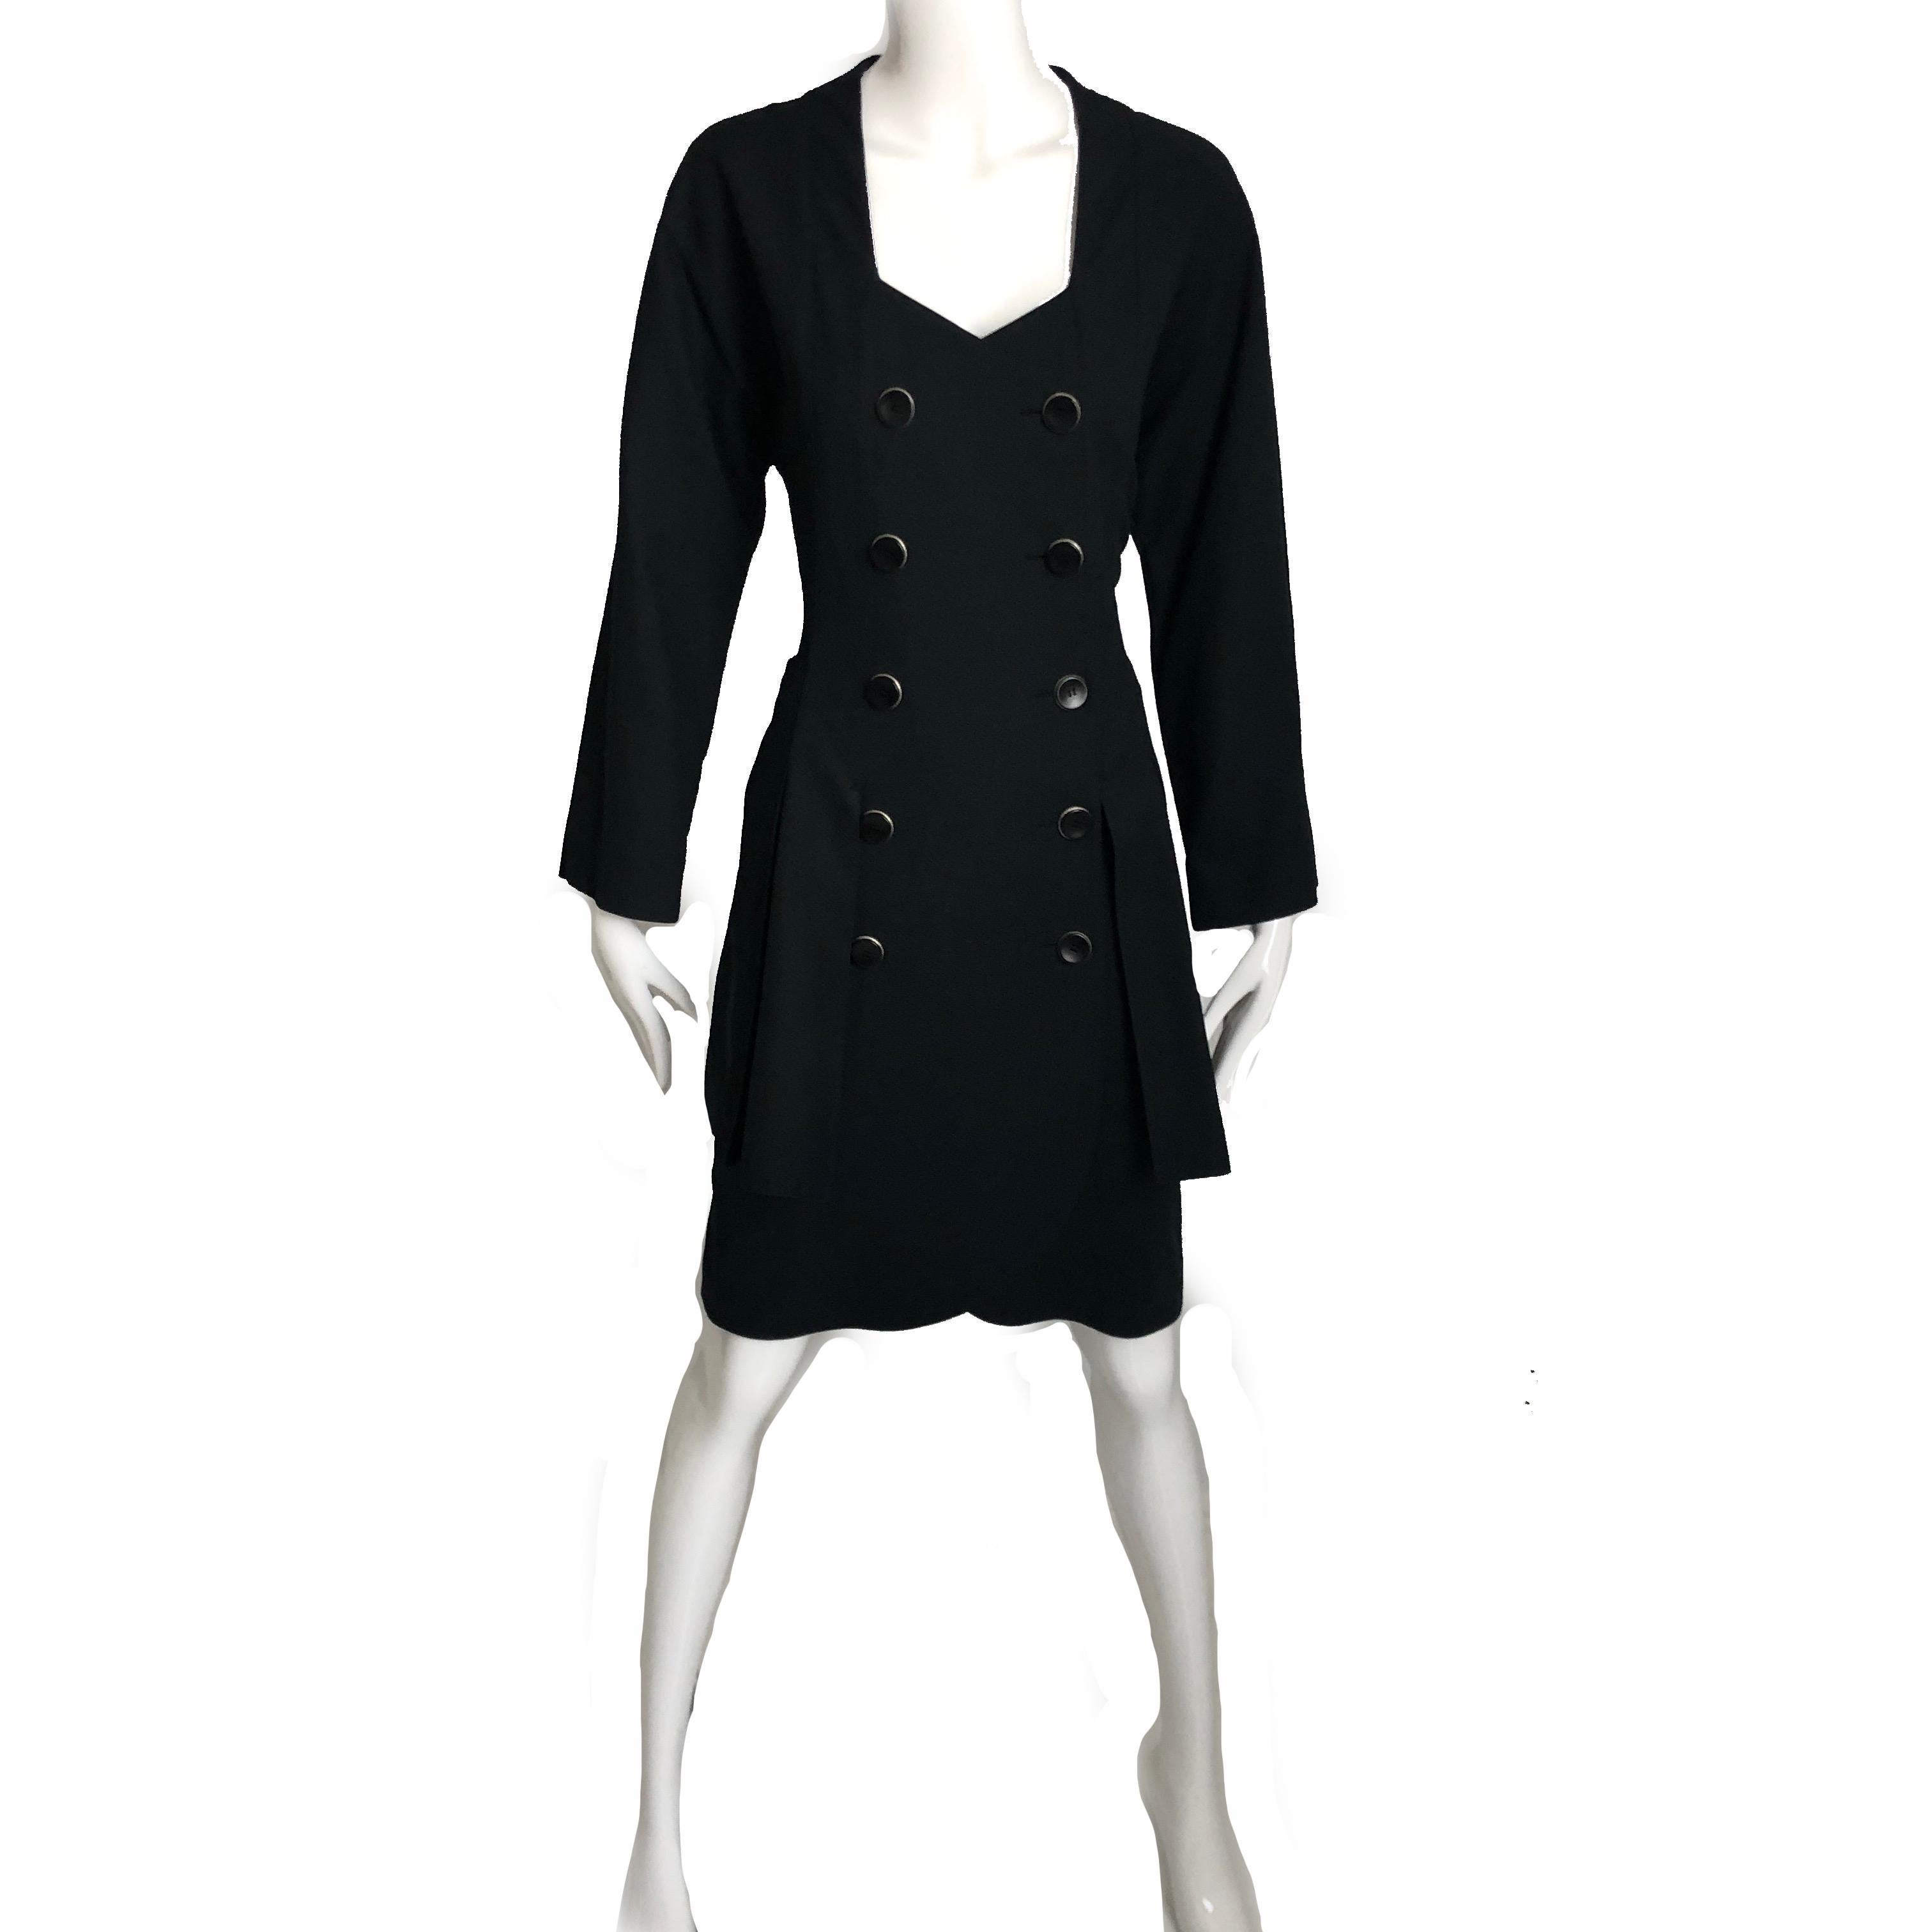 This smart suit style dress dress is from Karl Lagerfeld circa the 90s.  Made from black waffle-textured cotton, it looks like two pieces but is actually a button-wrap dress.  It features a 